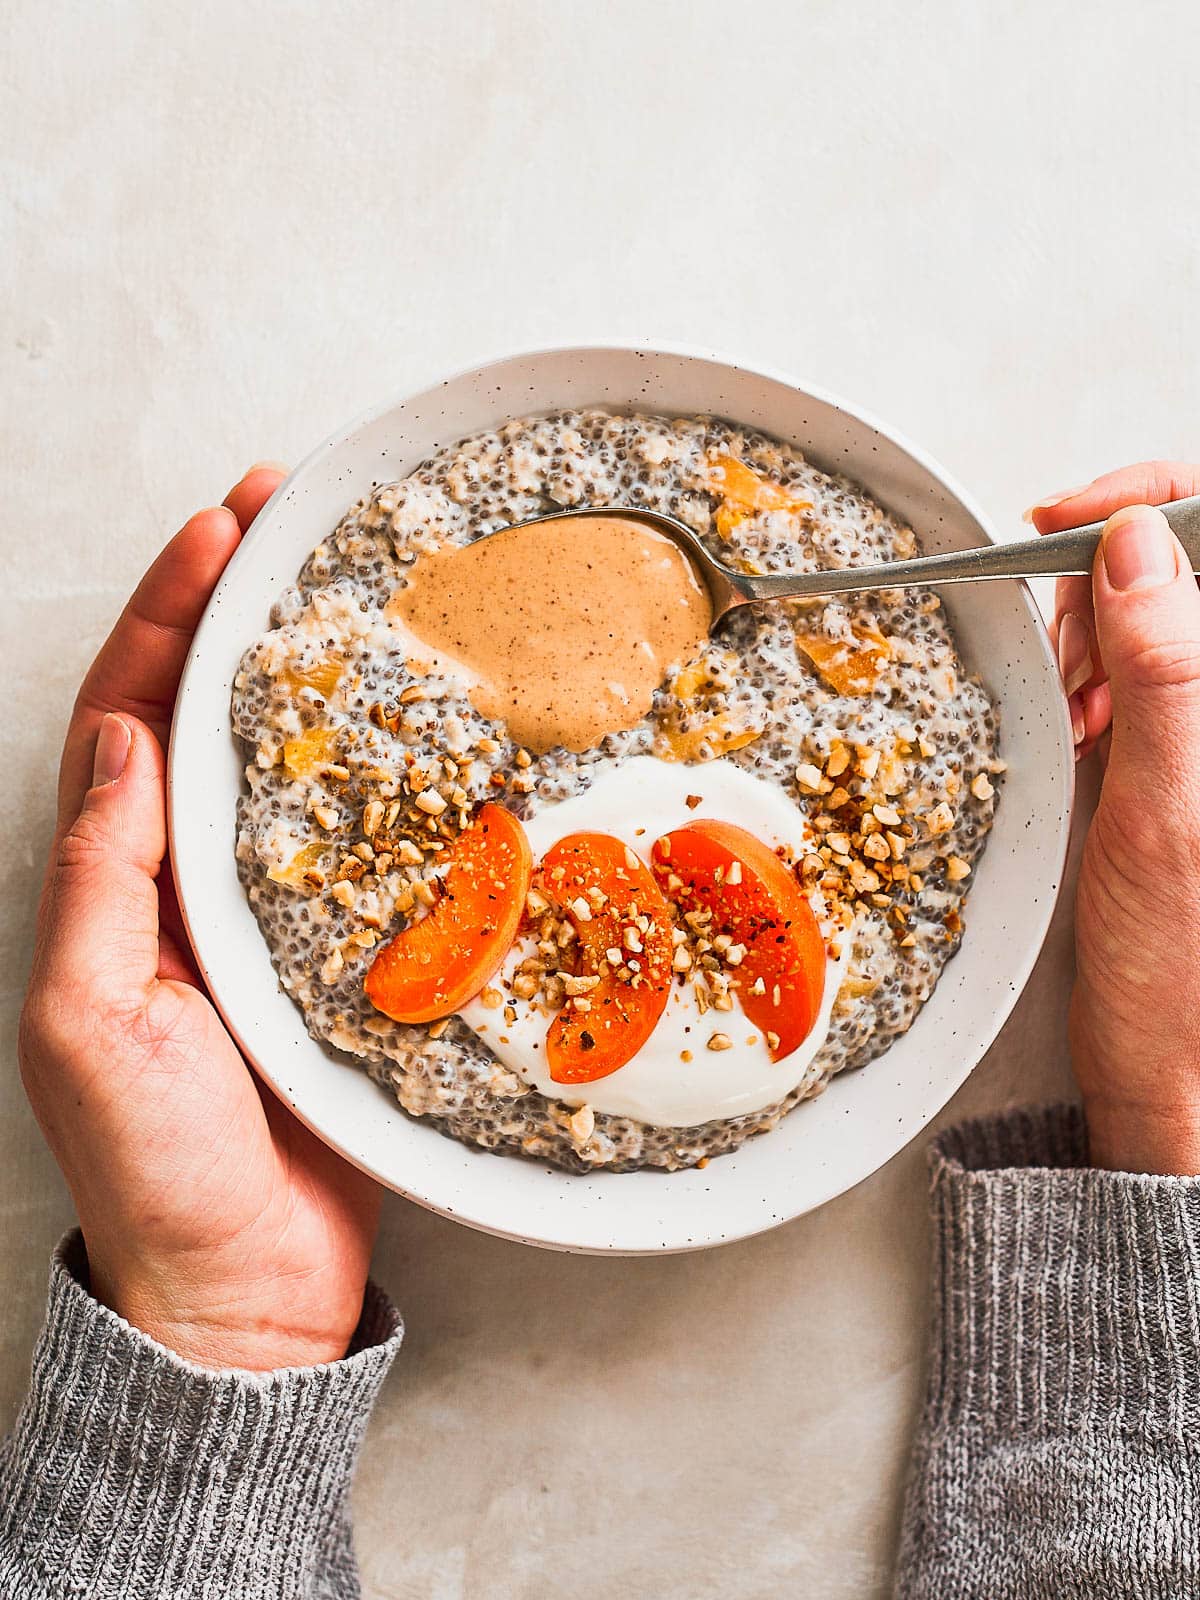 Overhead photo of a bowl of chia seed porridge with a hand holding a spoon